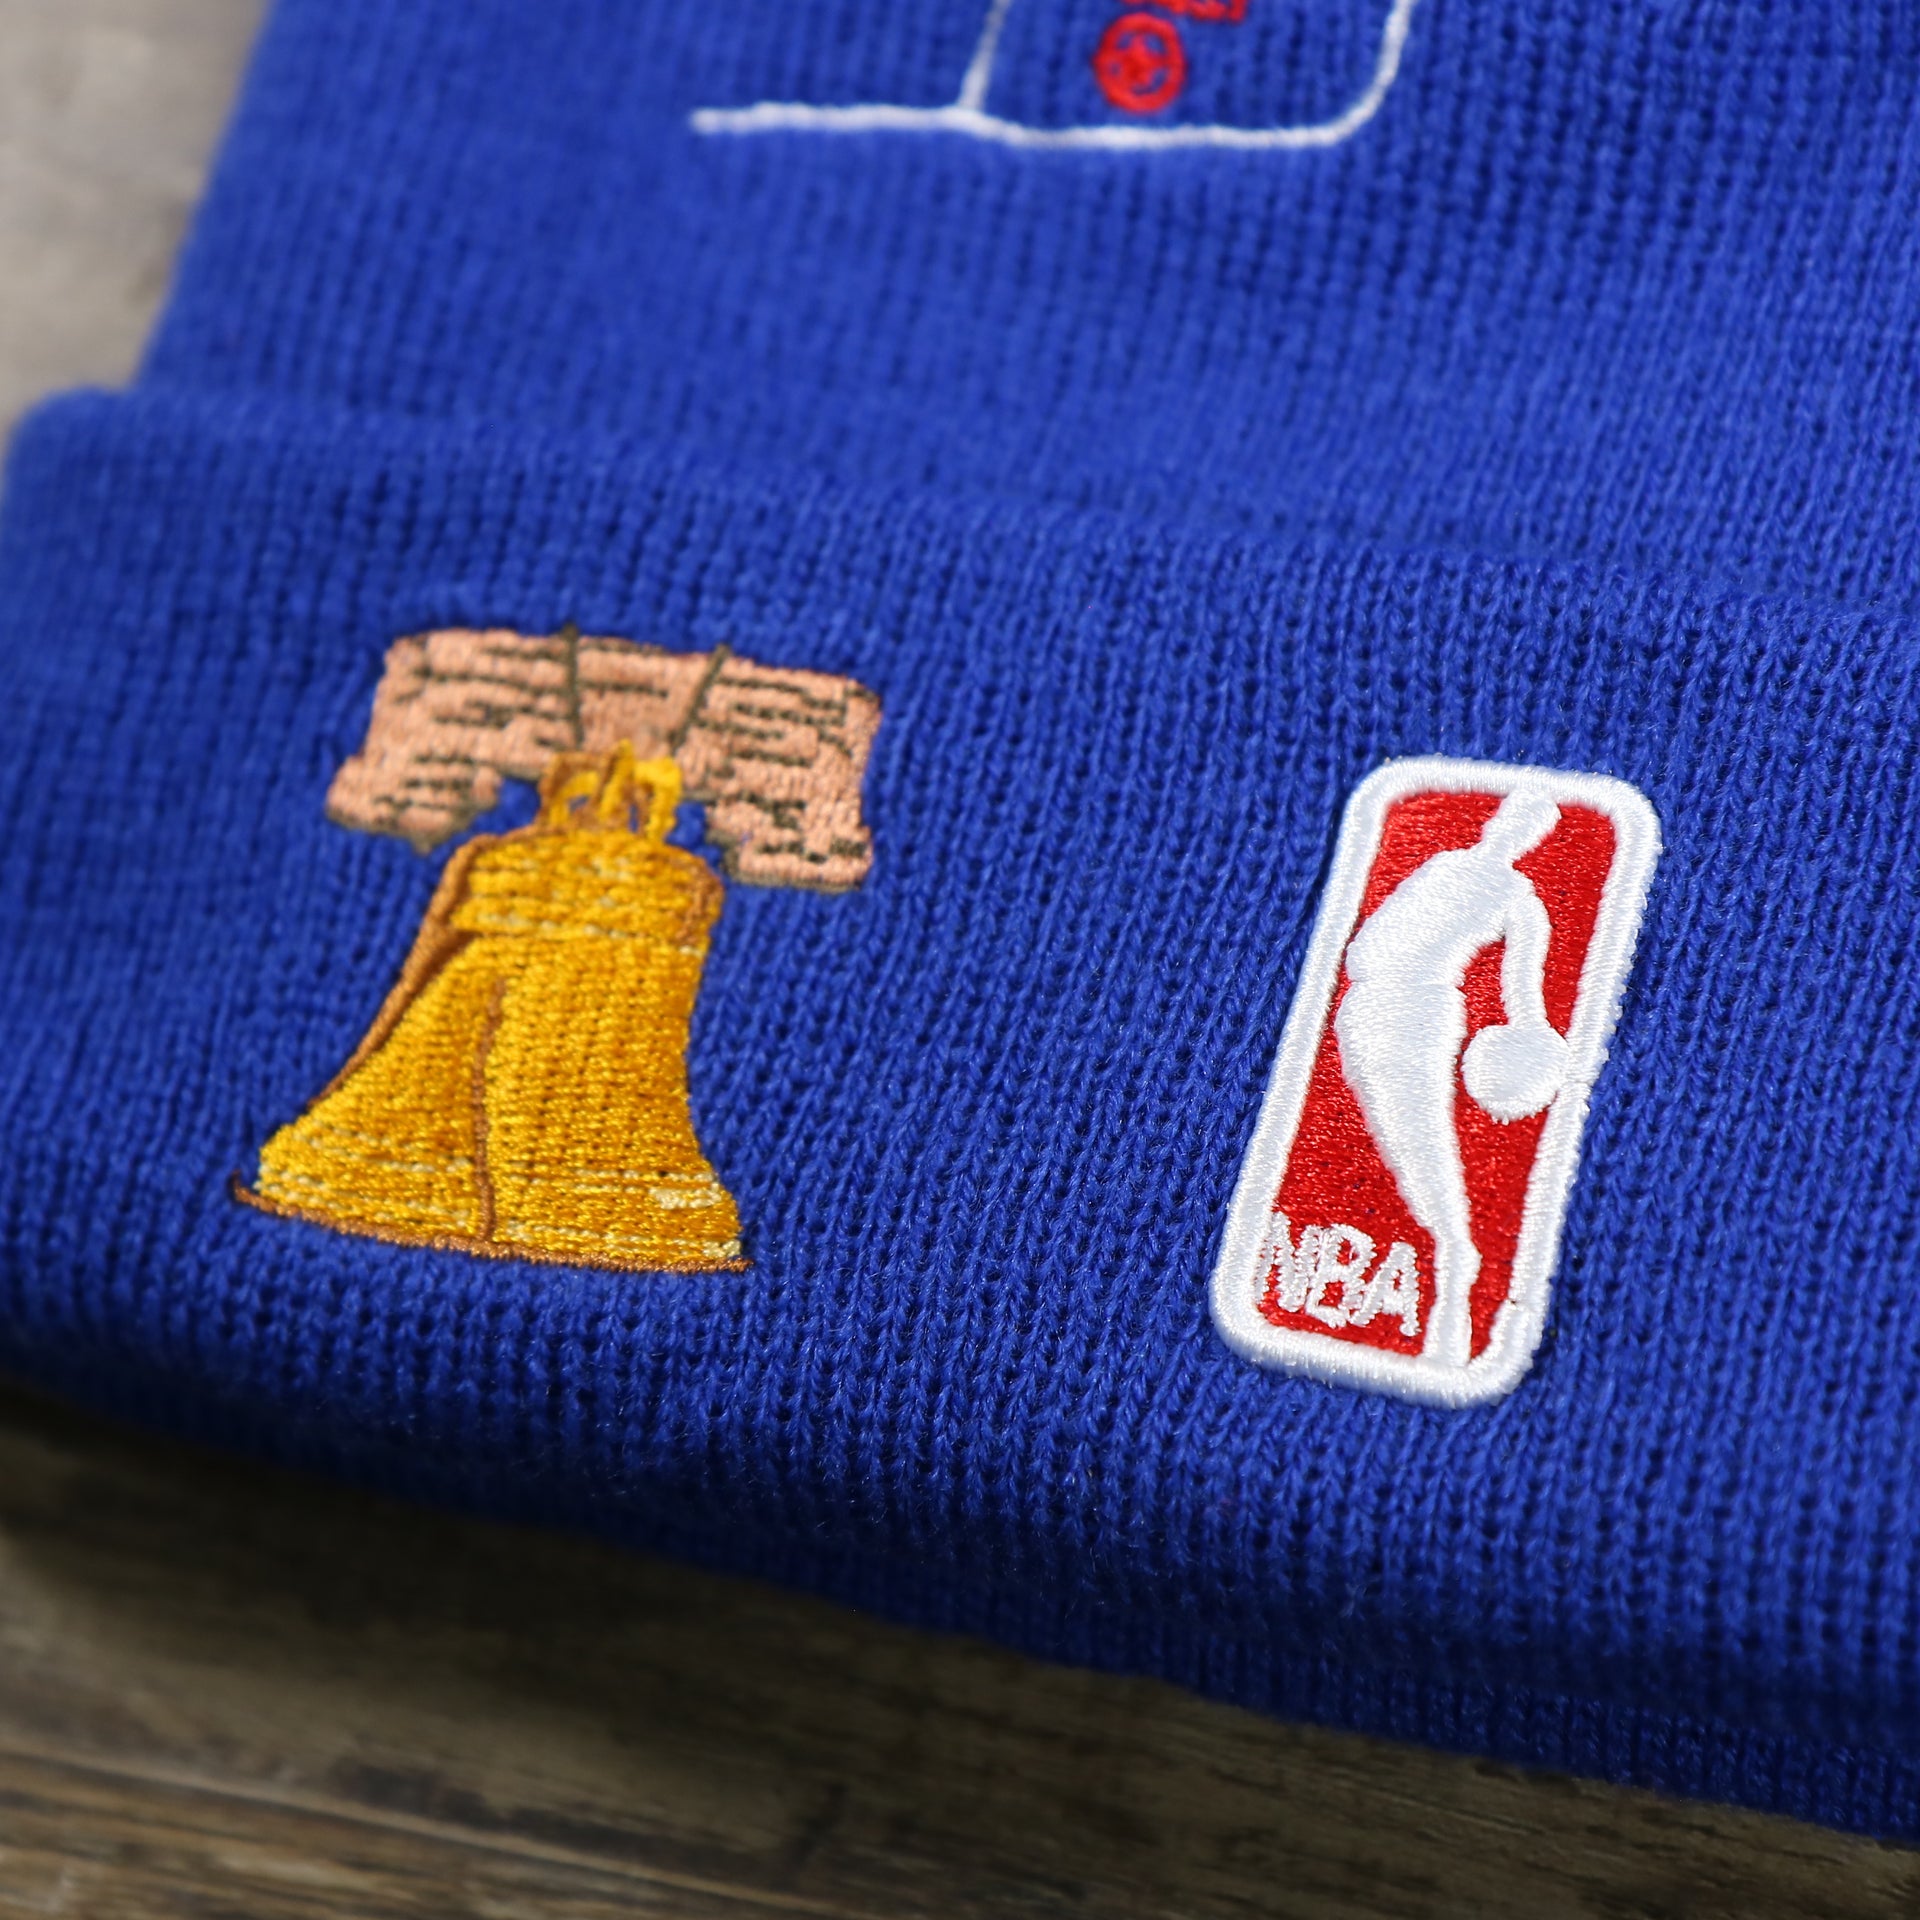 The NBA Jerry West Logo and the Cracker Liberty Bell Patch on the Philadelphia 76ers "City Transit" 59Fifty Fitted Matching All Over Side Patch Beanie